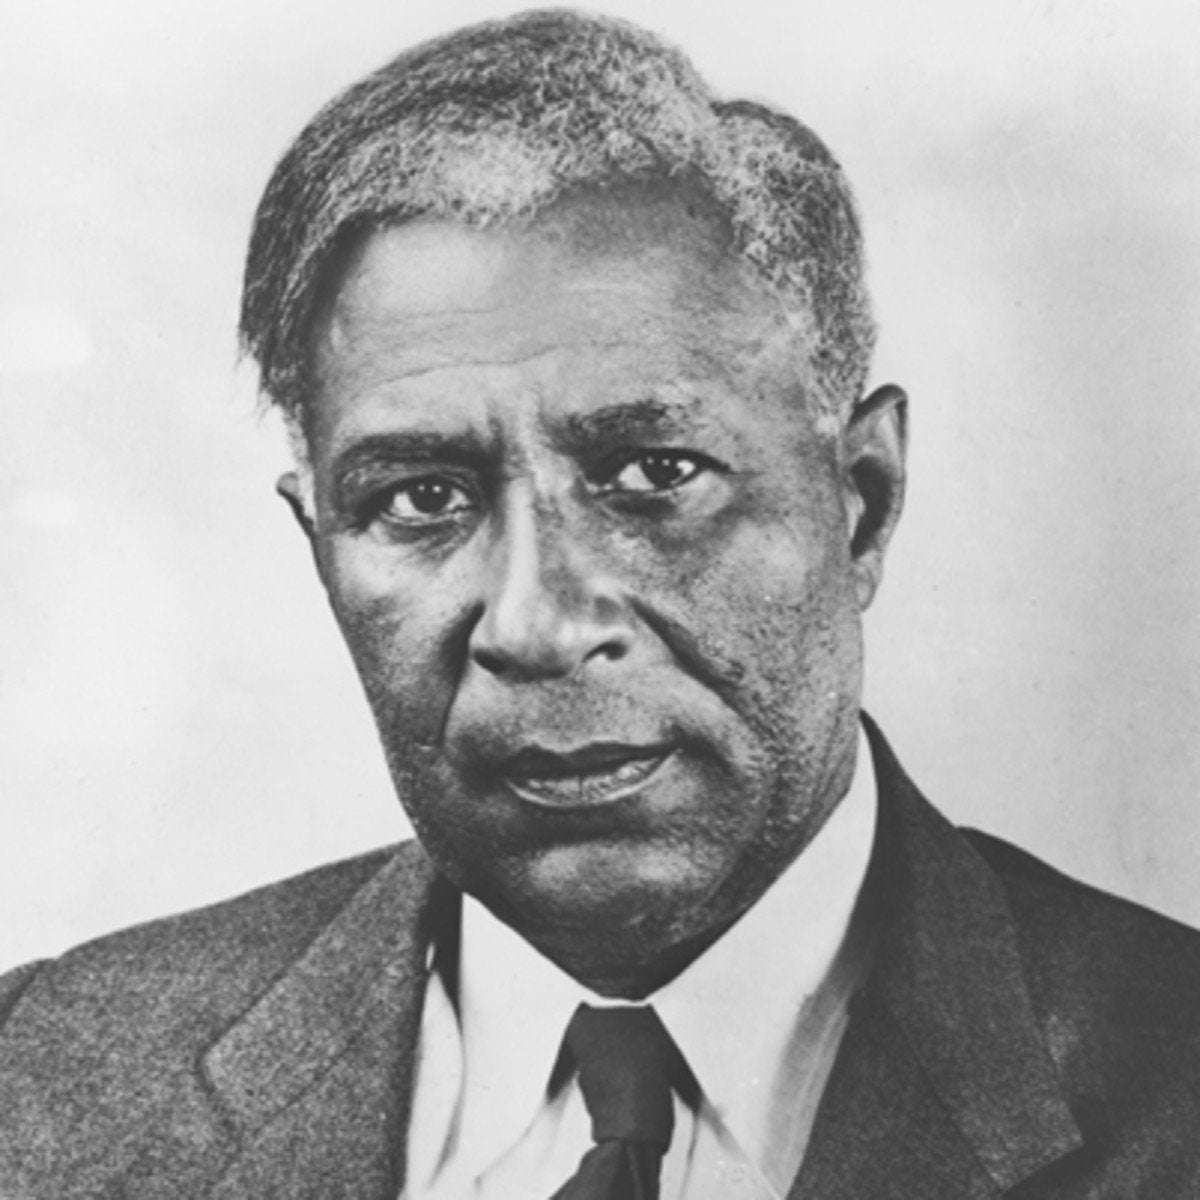 image for TIL Garrett Morgan, the inventor of the smoke hood, hired a white actor to pose as the real inventor during presentations and marketing of his device. His secret was exposed after using his invention in an emergency to rescue several people from a collapsed tunnel, and his sales dropped sharply.